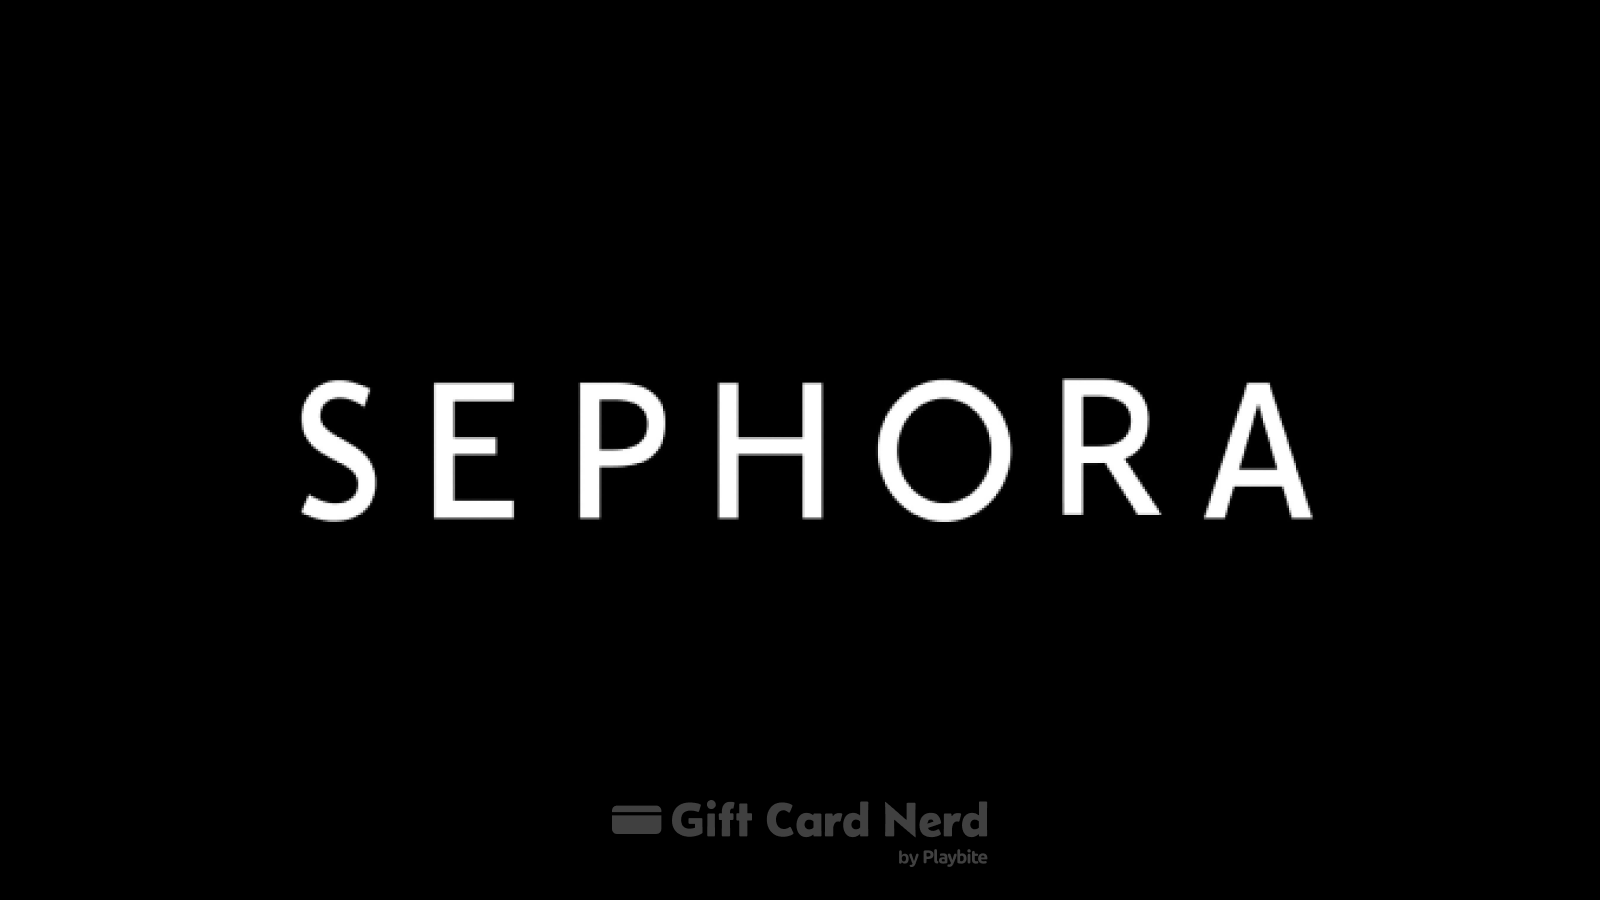 Does GameStop Sell Sephora Gift Cards?